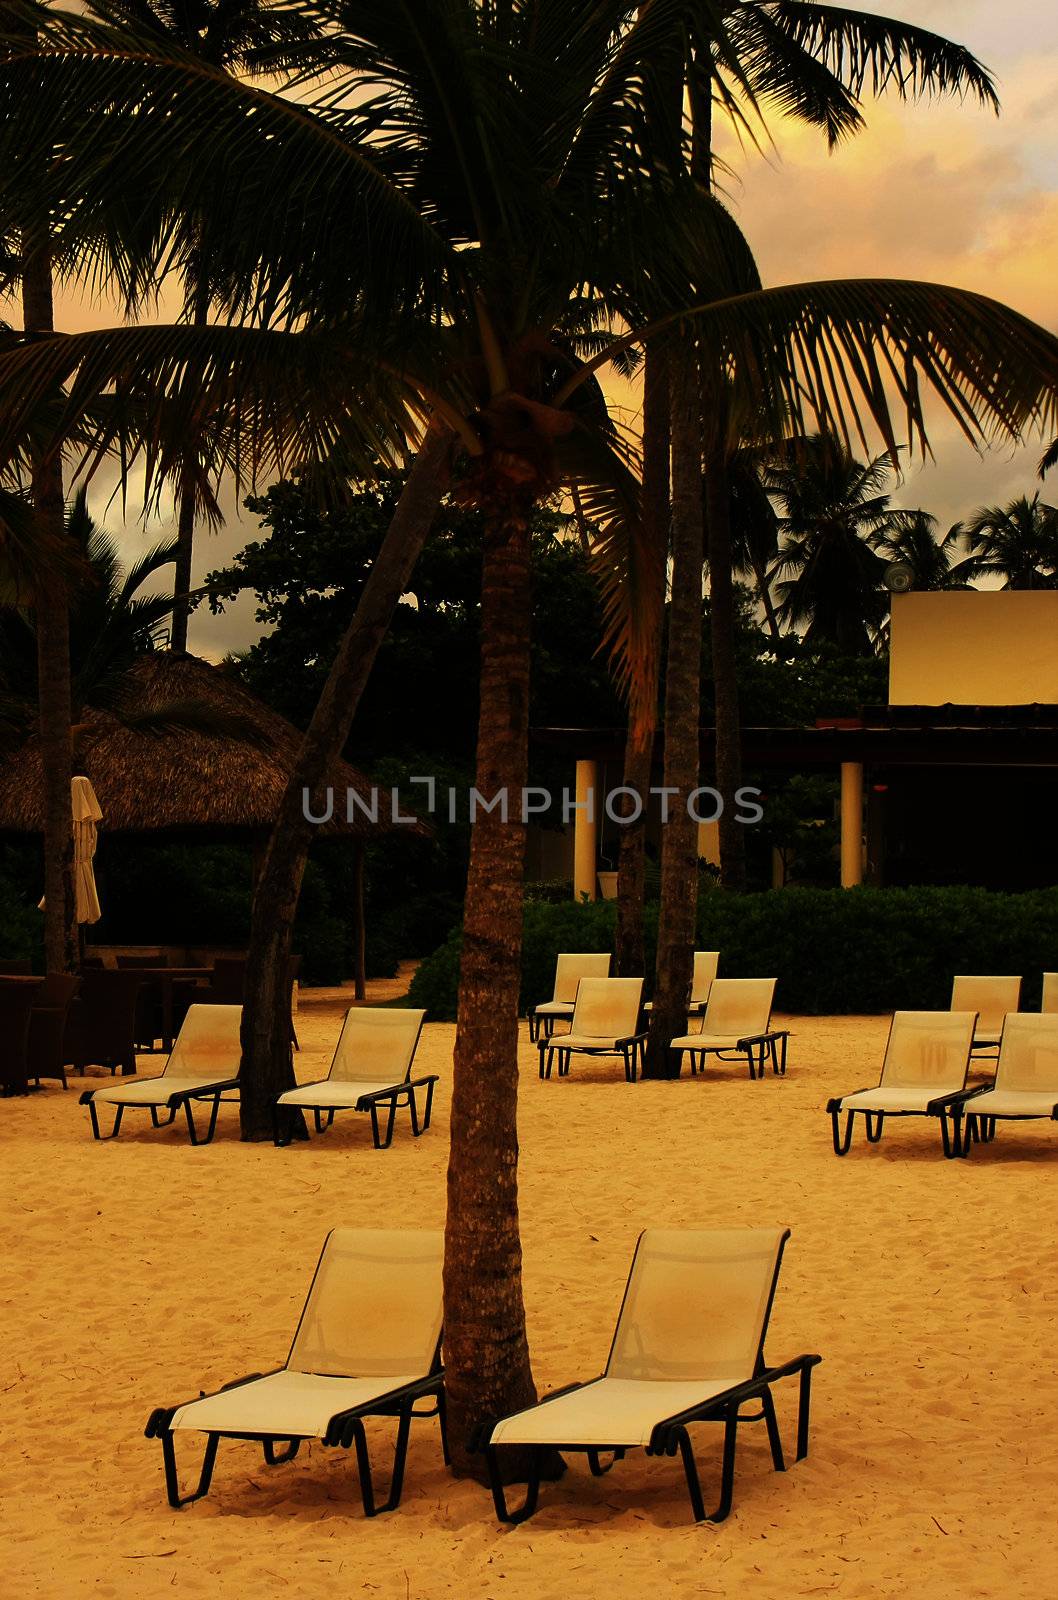 Beach chairs and palm trees on a beach by donya_nedomam